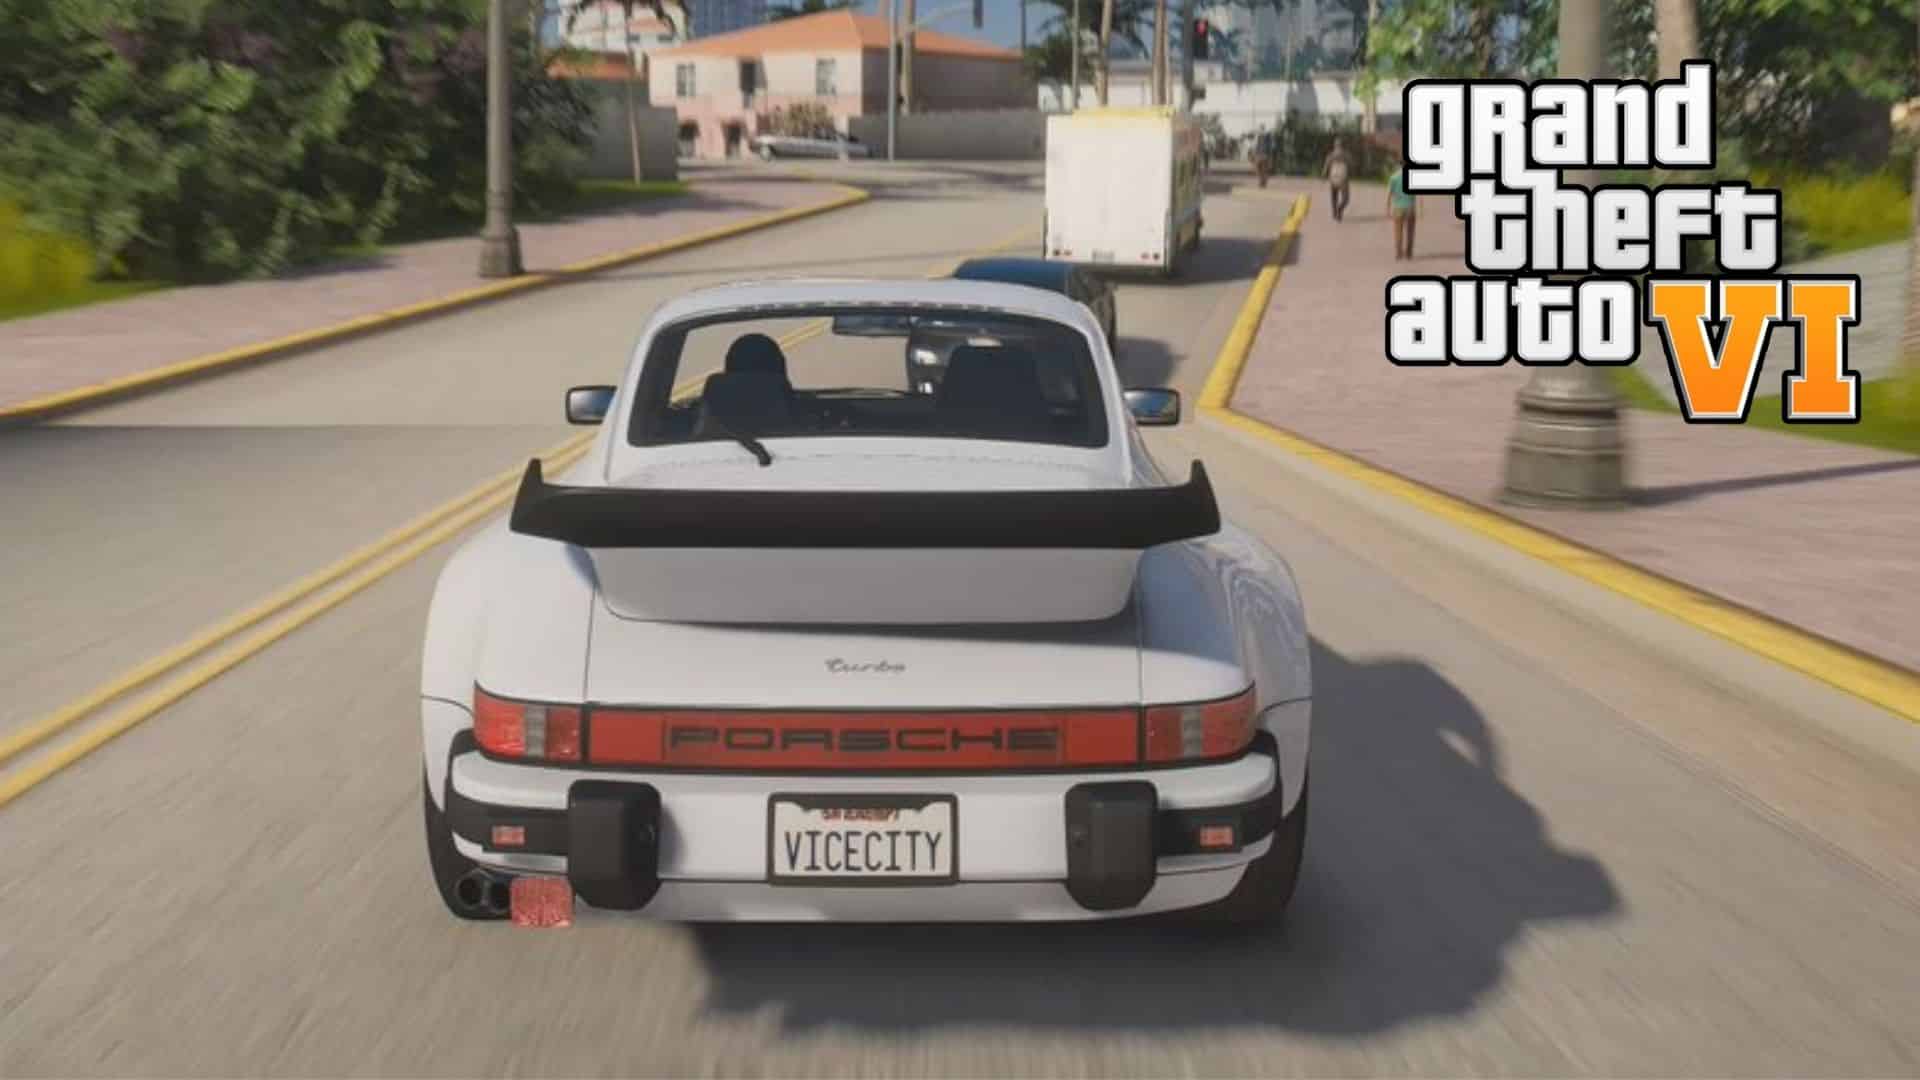 Porchse mod in GTA 5 with VIce City plate